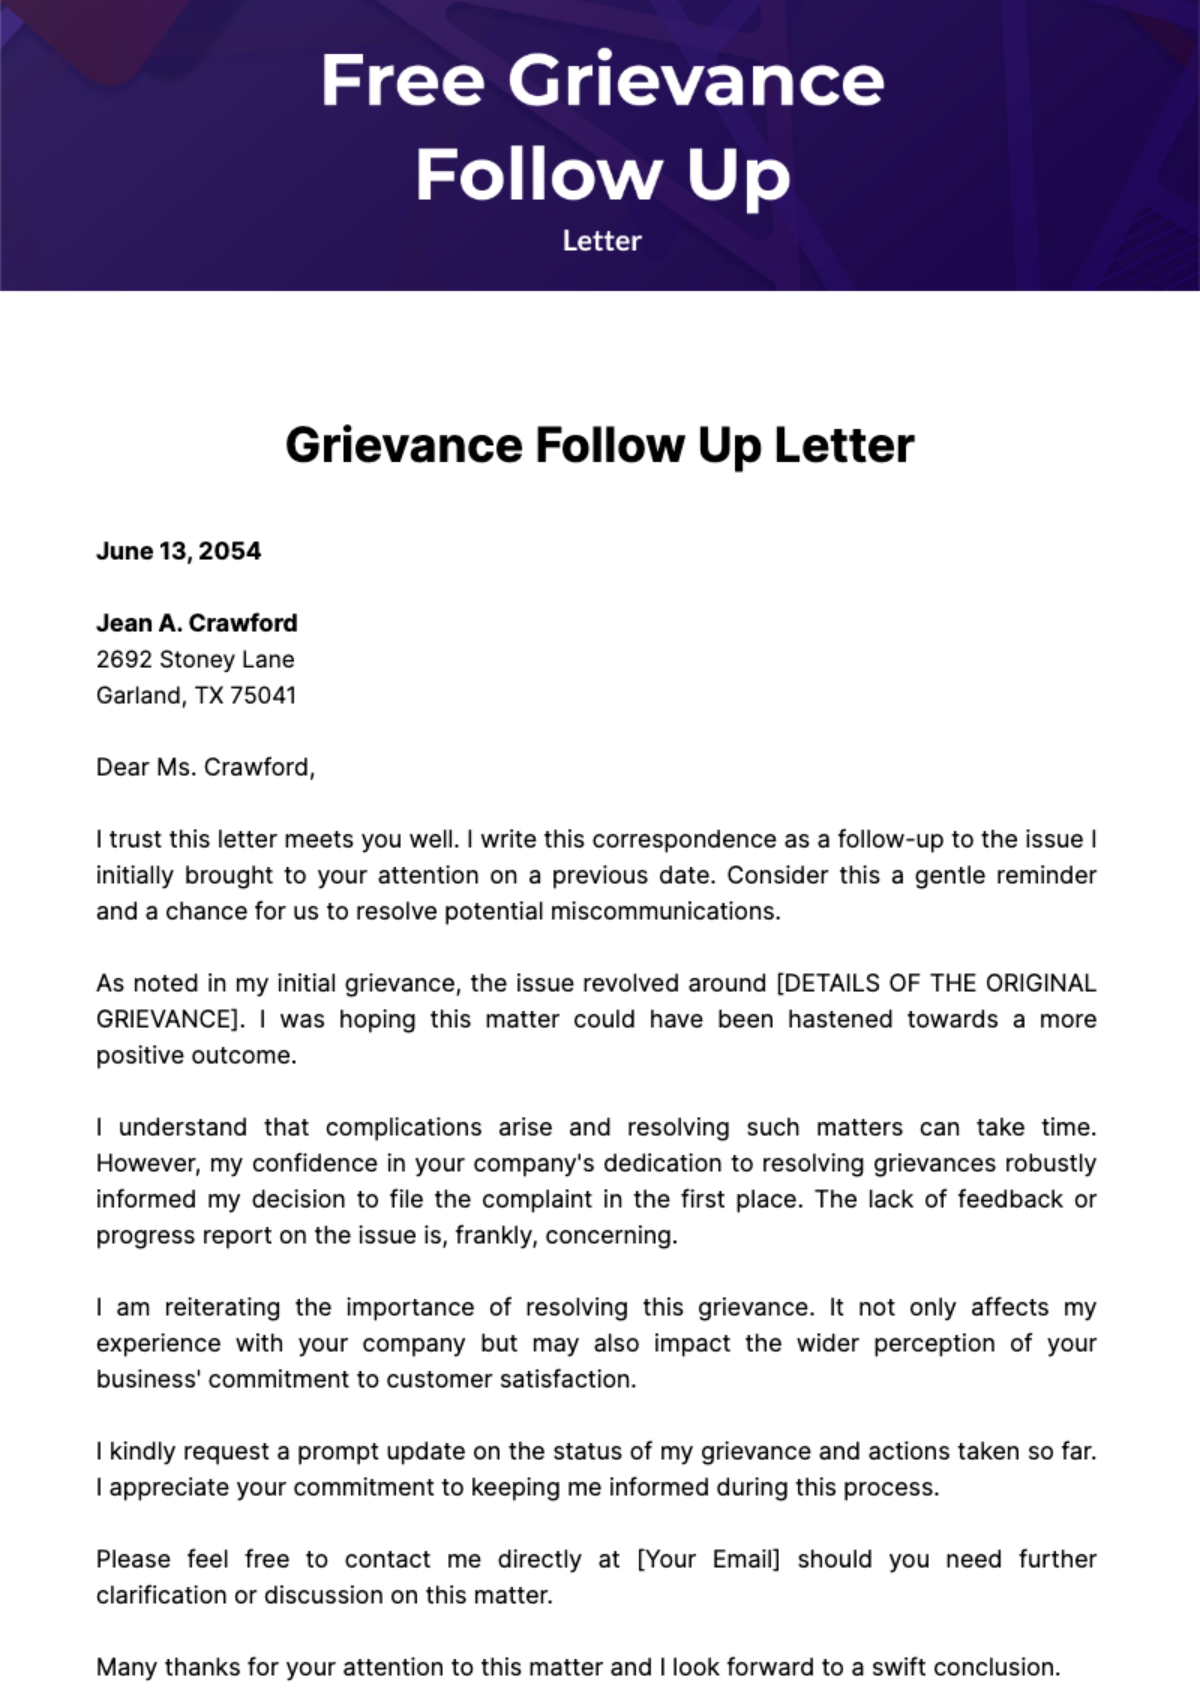 Free Grievance Follow Up Letter Template